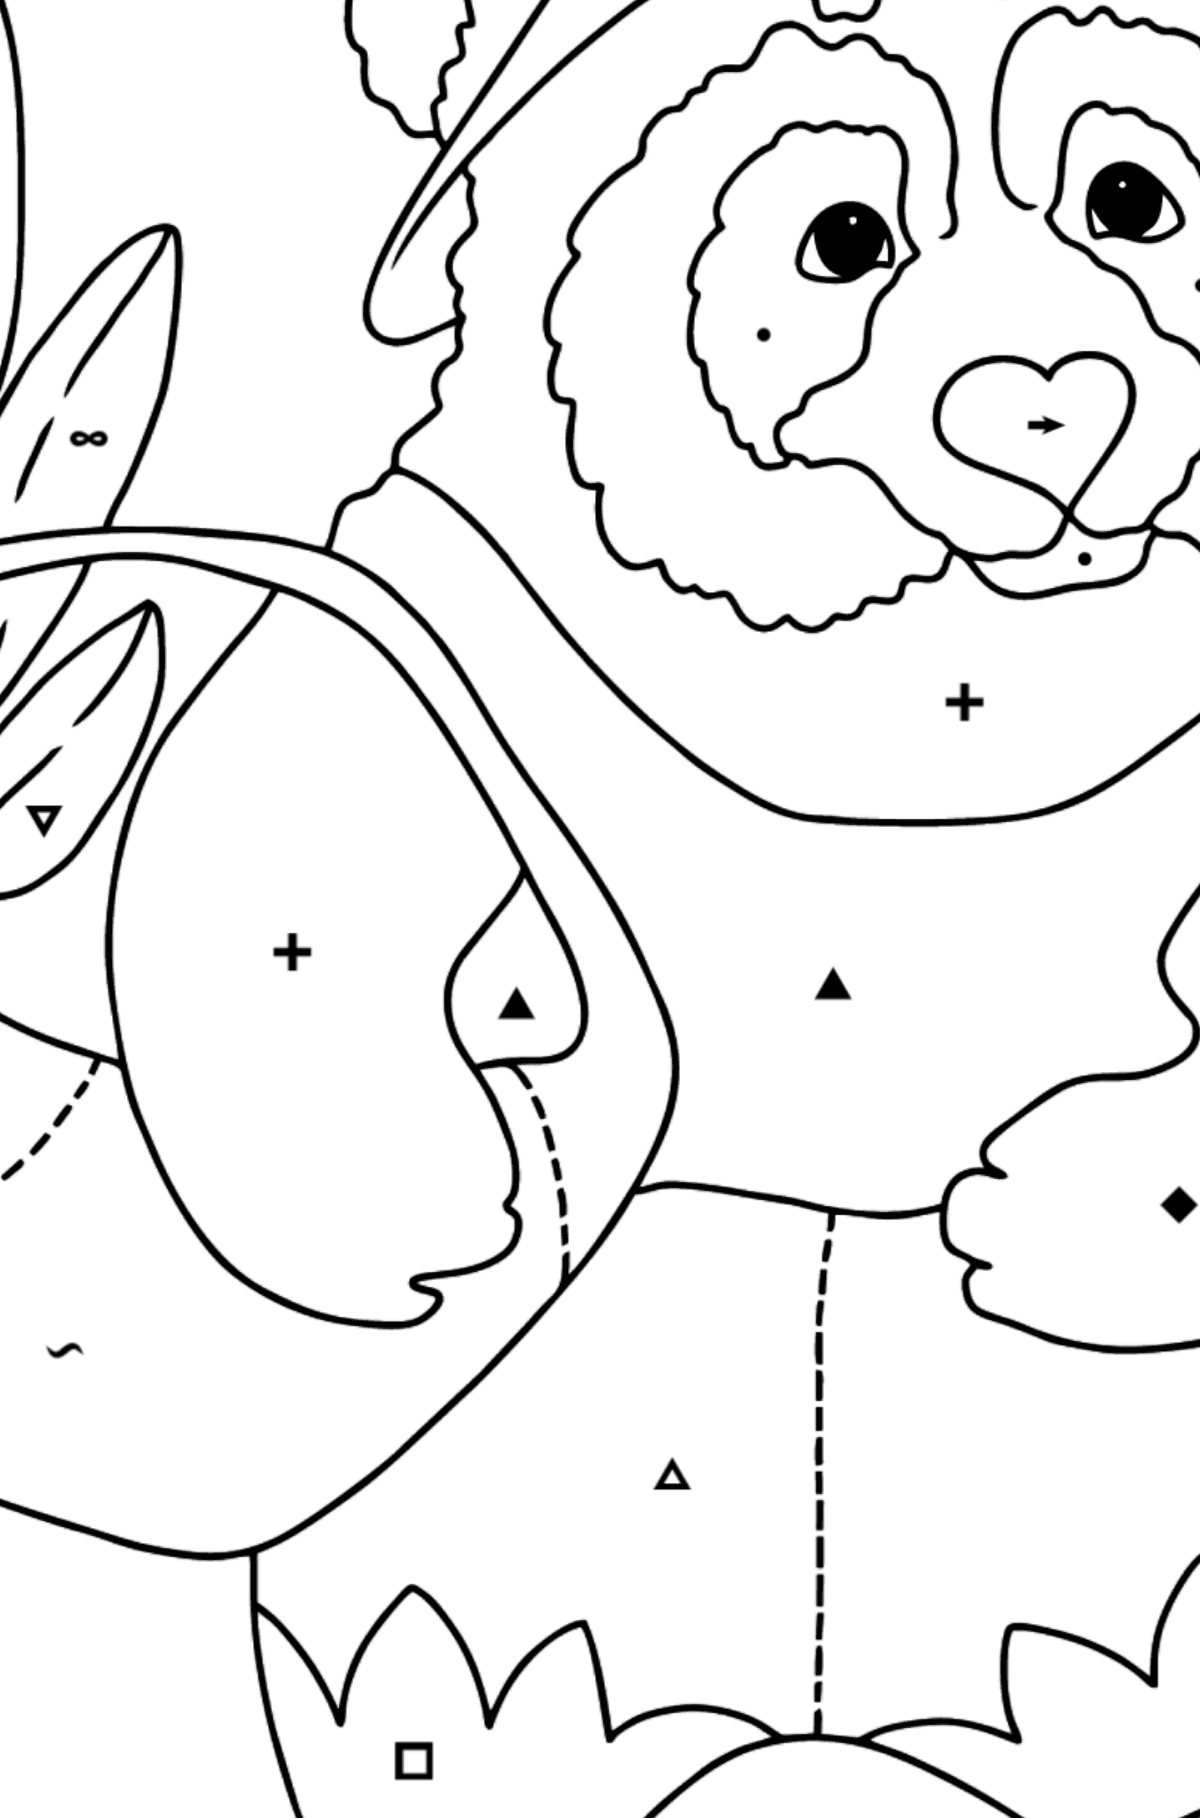 Kind Panda coloring page - Coloring by Symbols for Kids